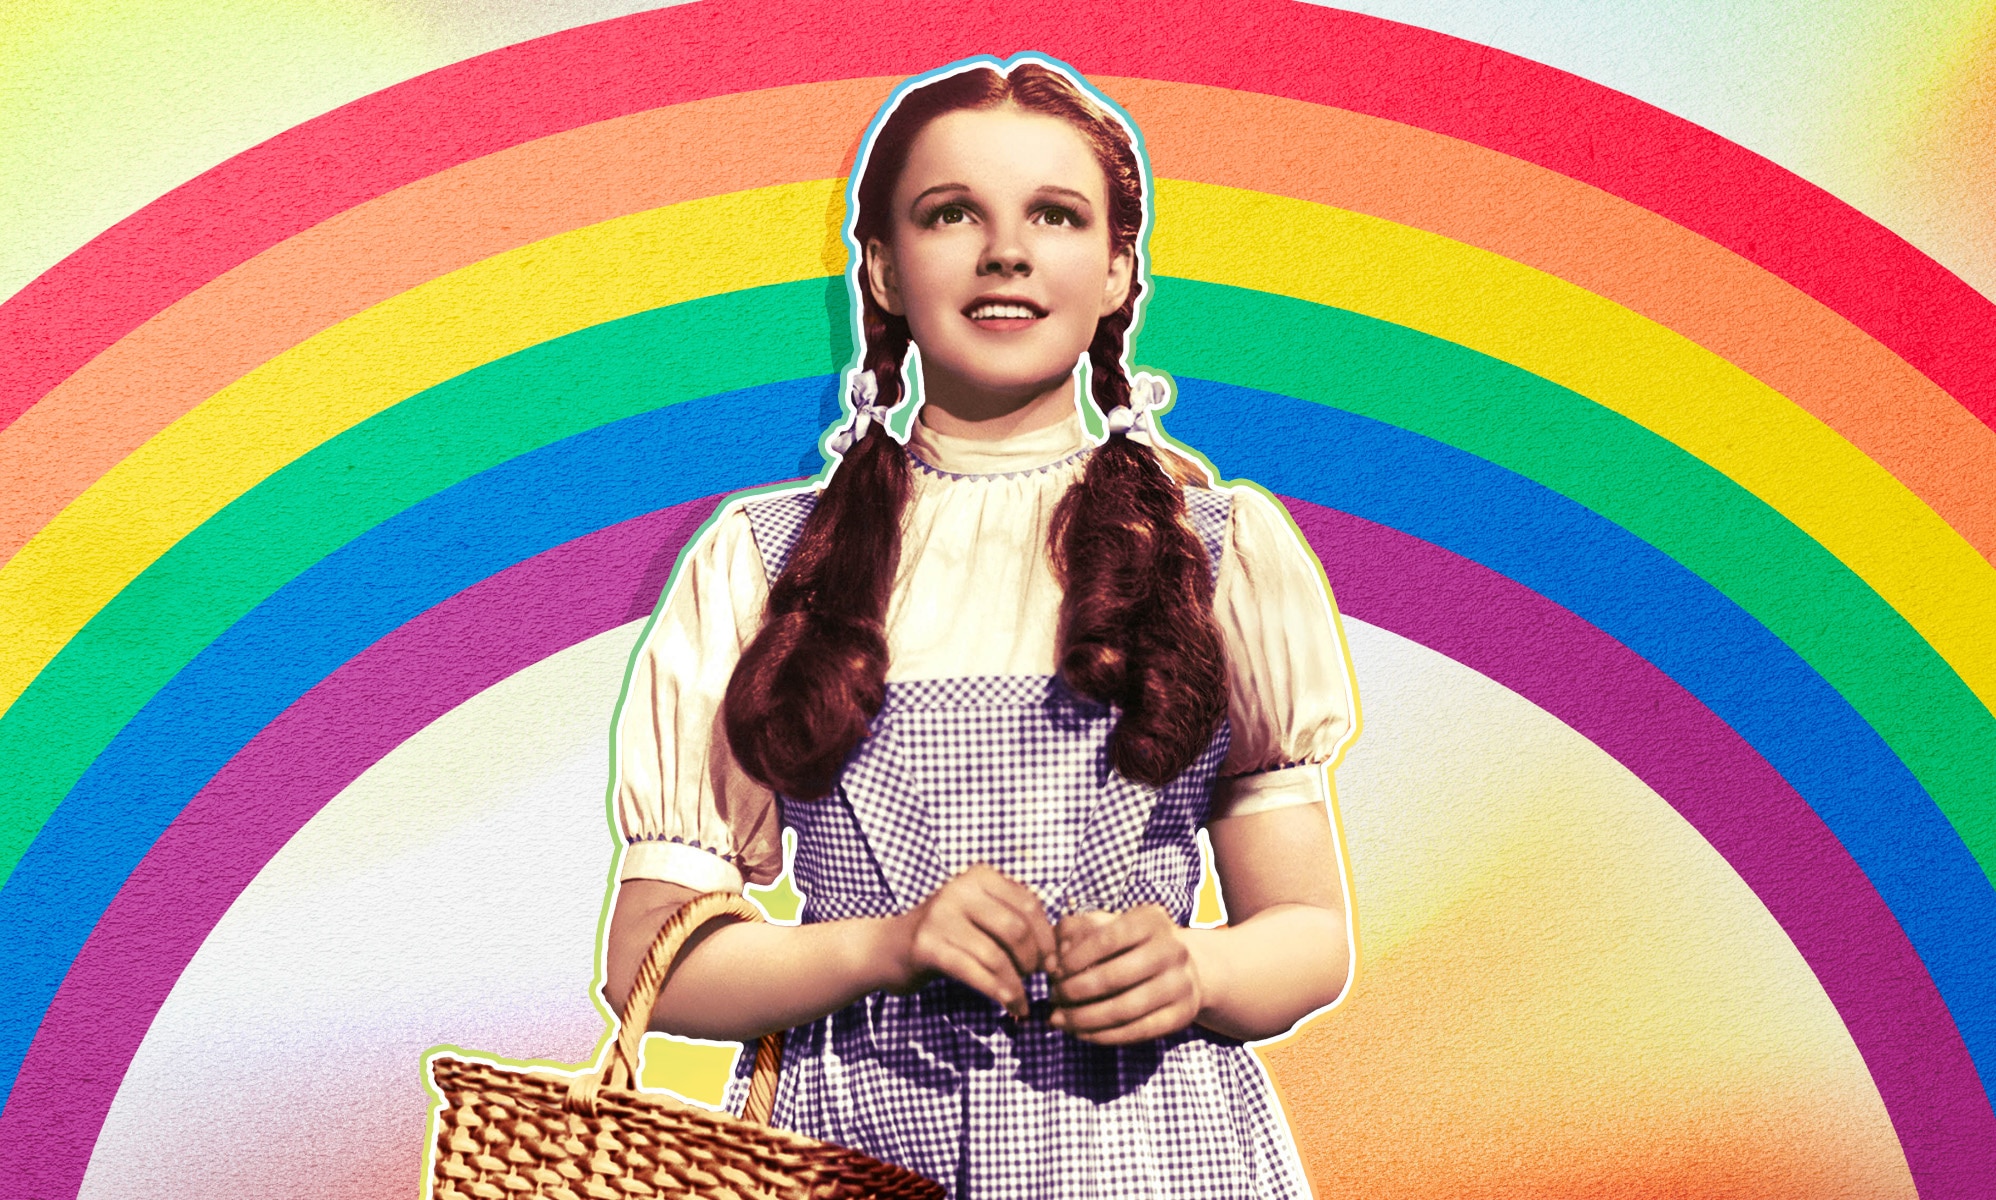 Judy Garland in The Wizard of Oz. 